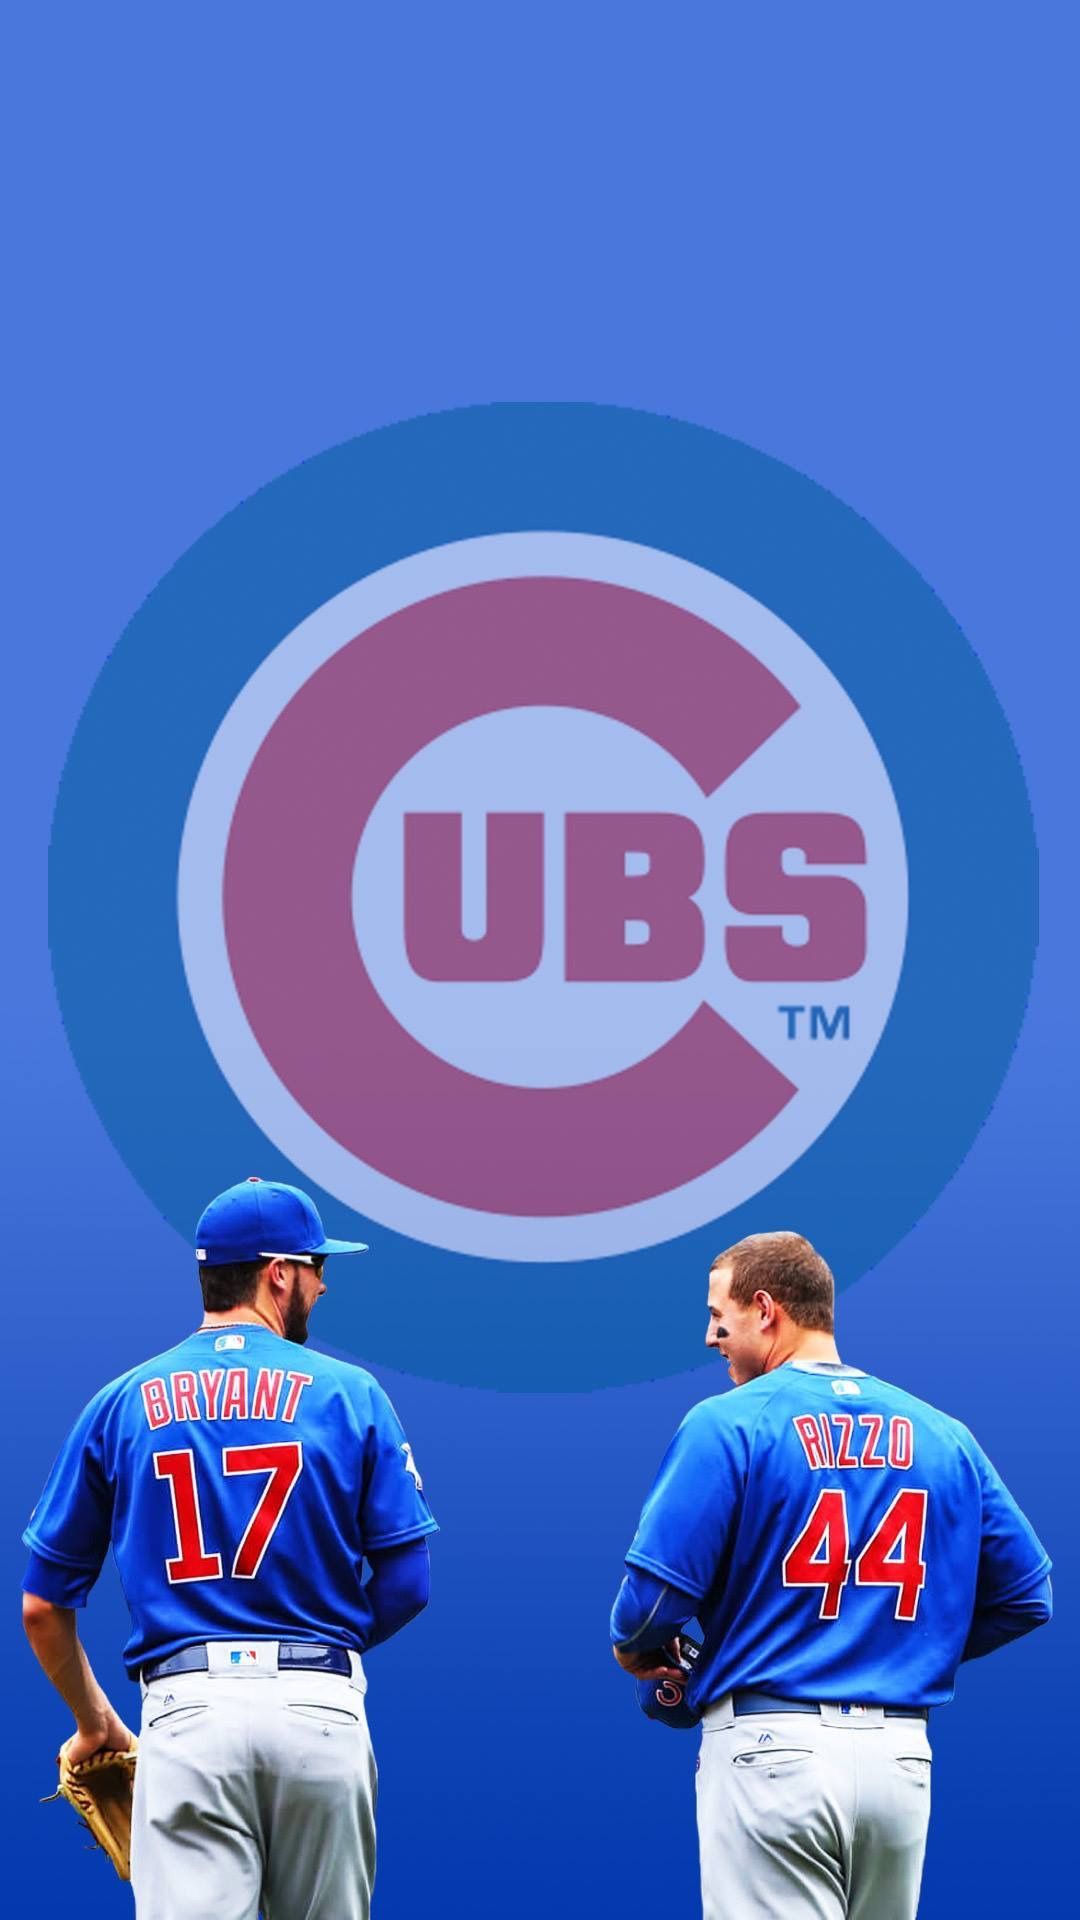 Chicago Cubs Players Wallpaper, HD Chicago Cubs Players Background on WallpaperBat